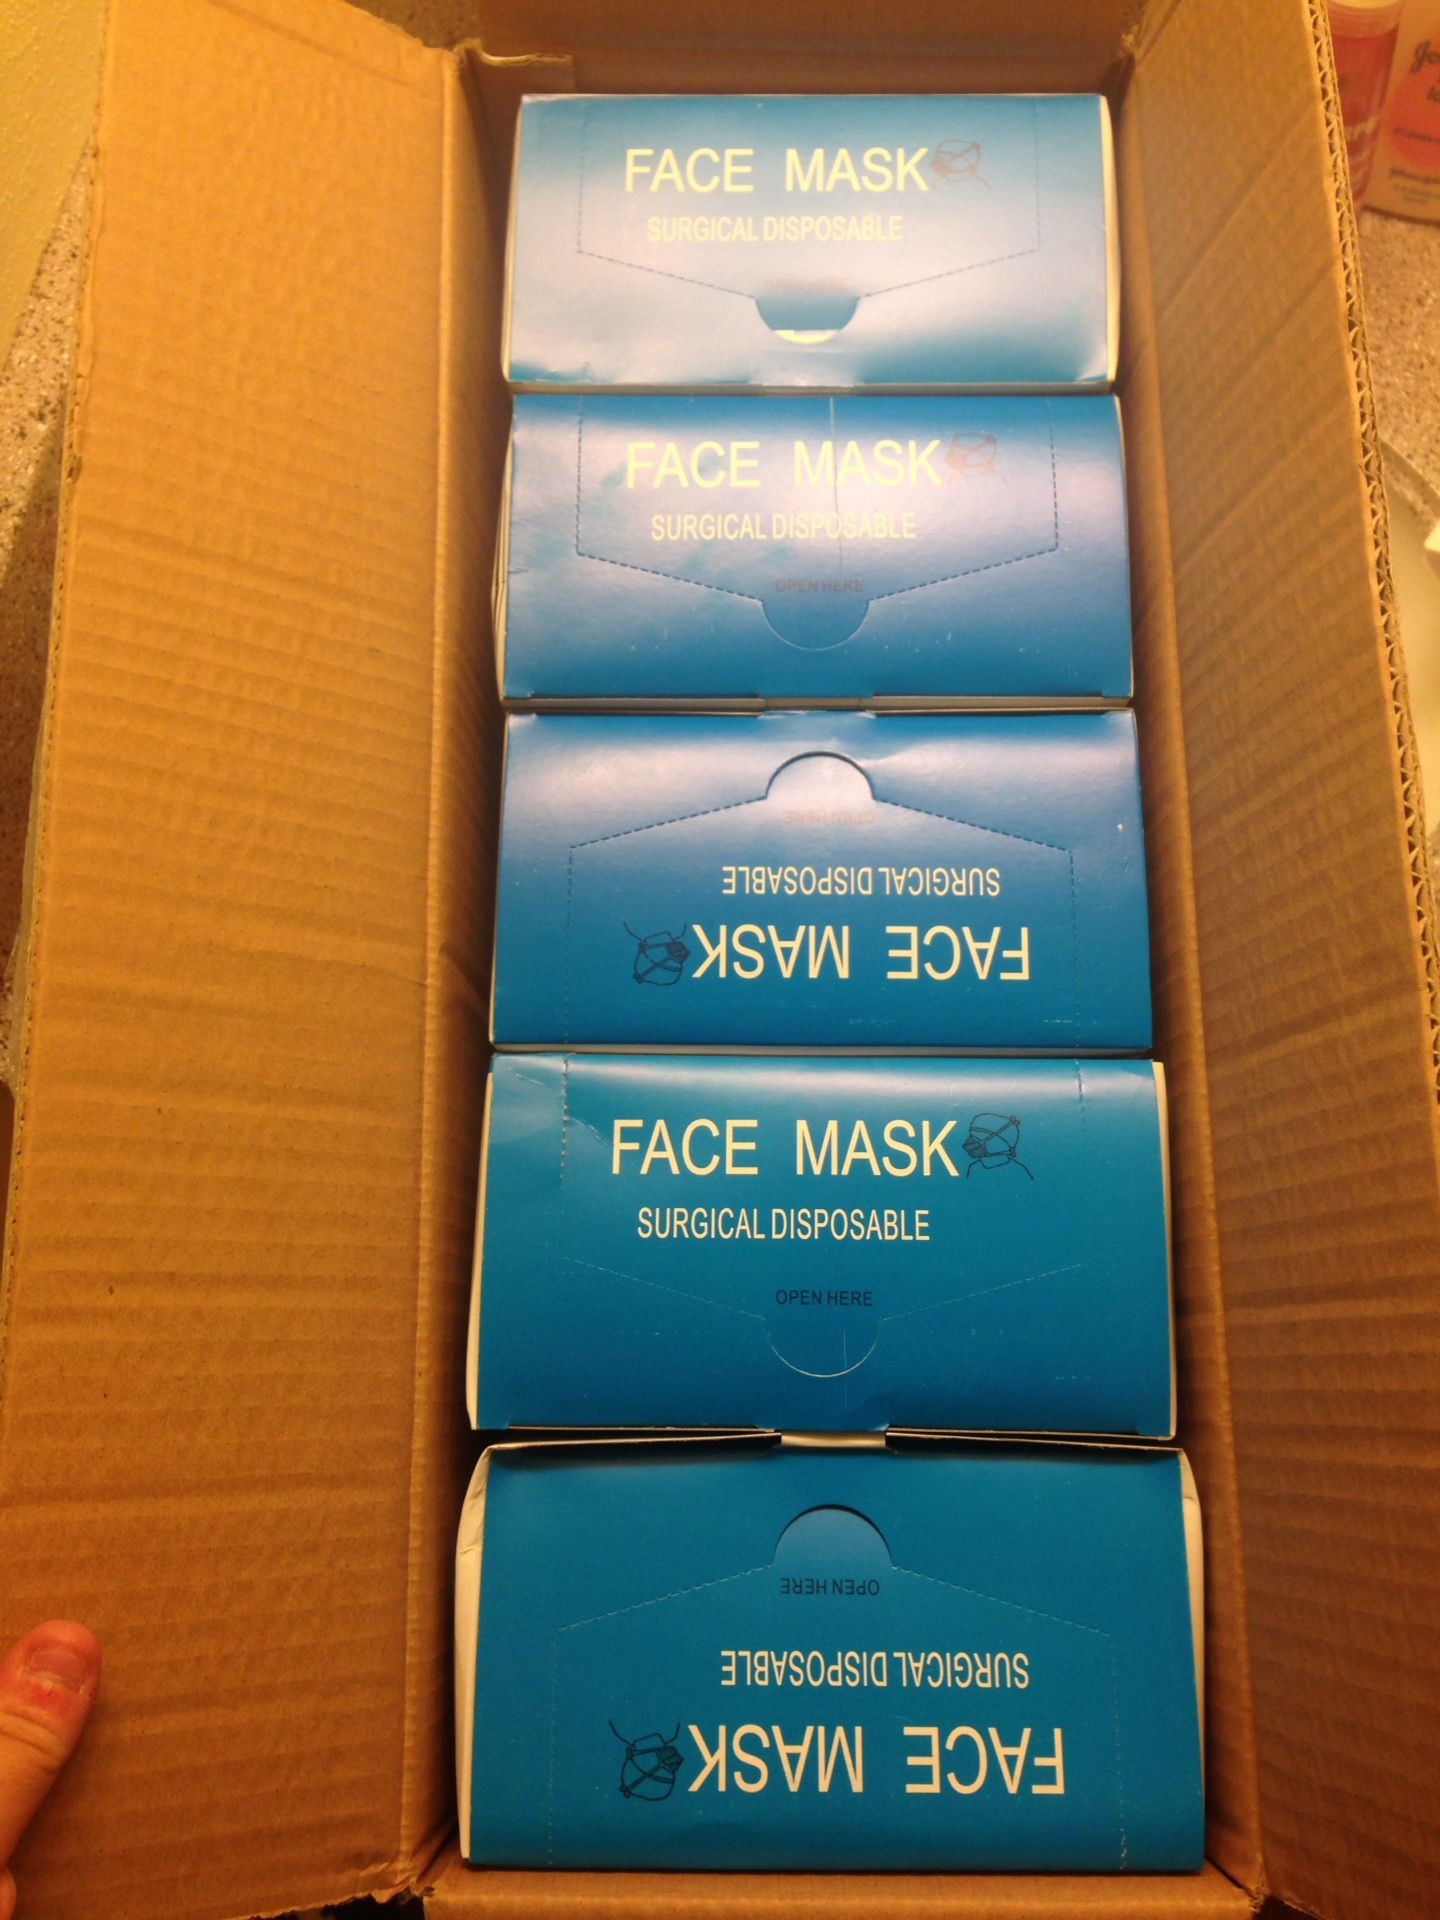 10 boxes of face mask 50 pieces each box total of 500 pieces of face mask